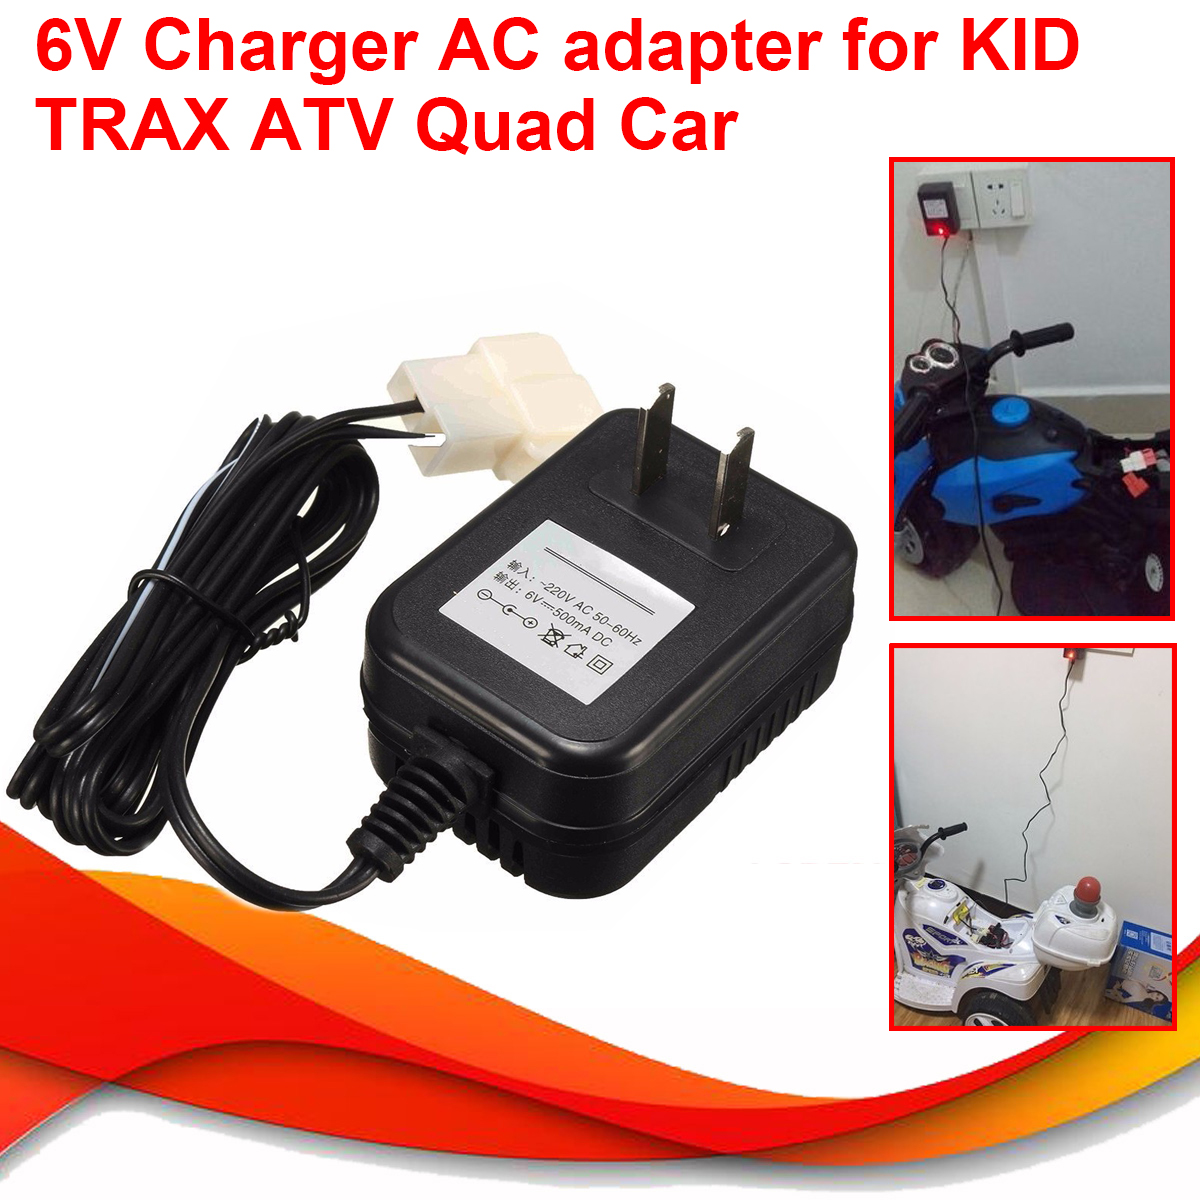 Wall-Charger-AC-Adapter-for-KID-TRAX-ATV-Quad-6V-Battery-Powered-Ride-1363257-3